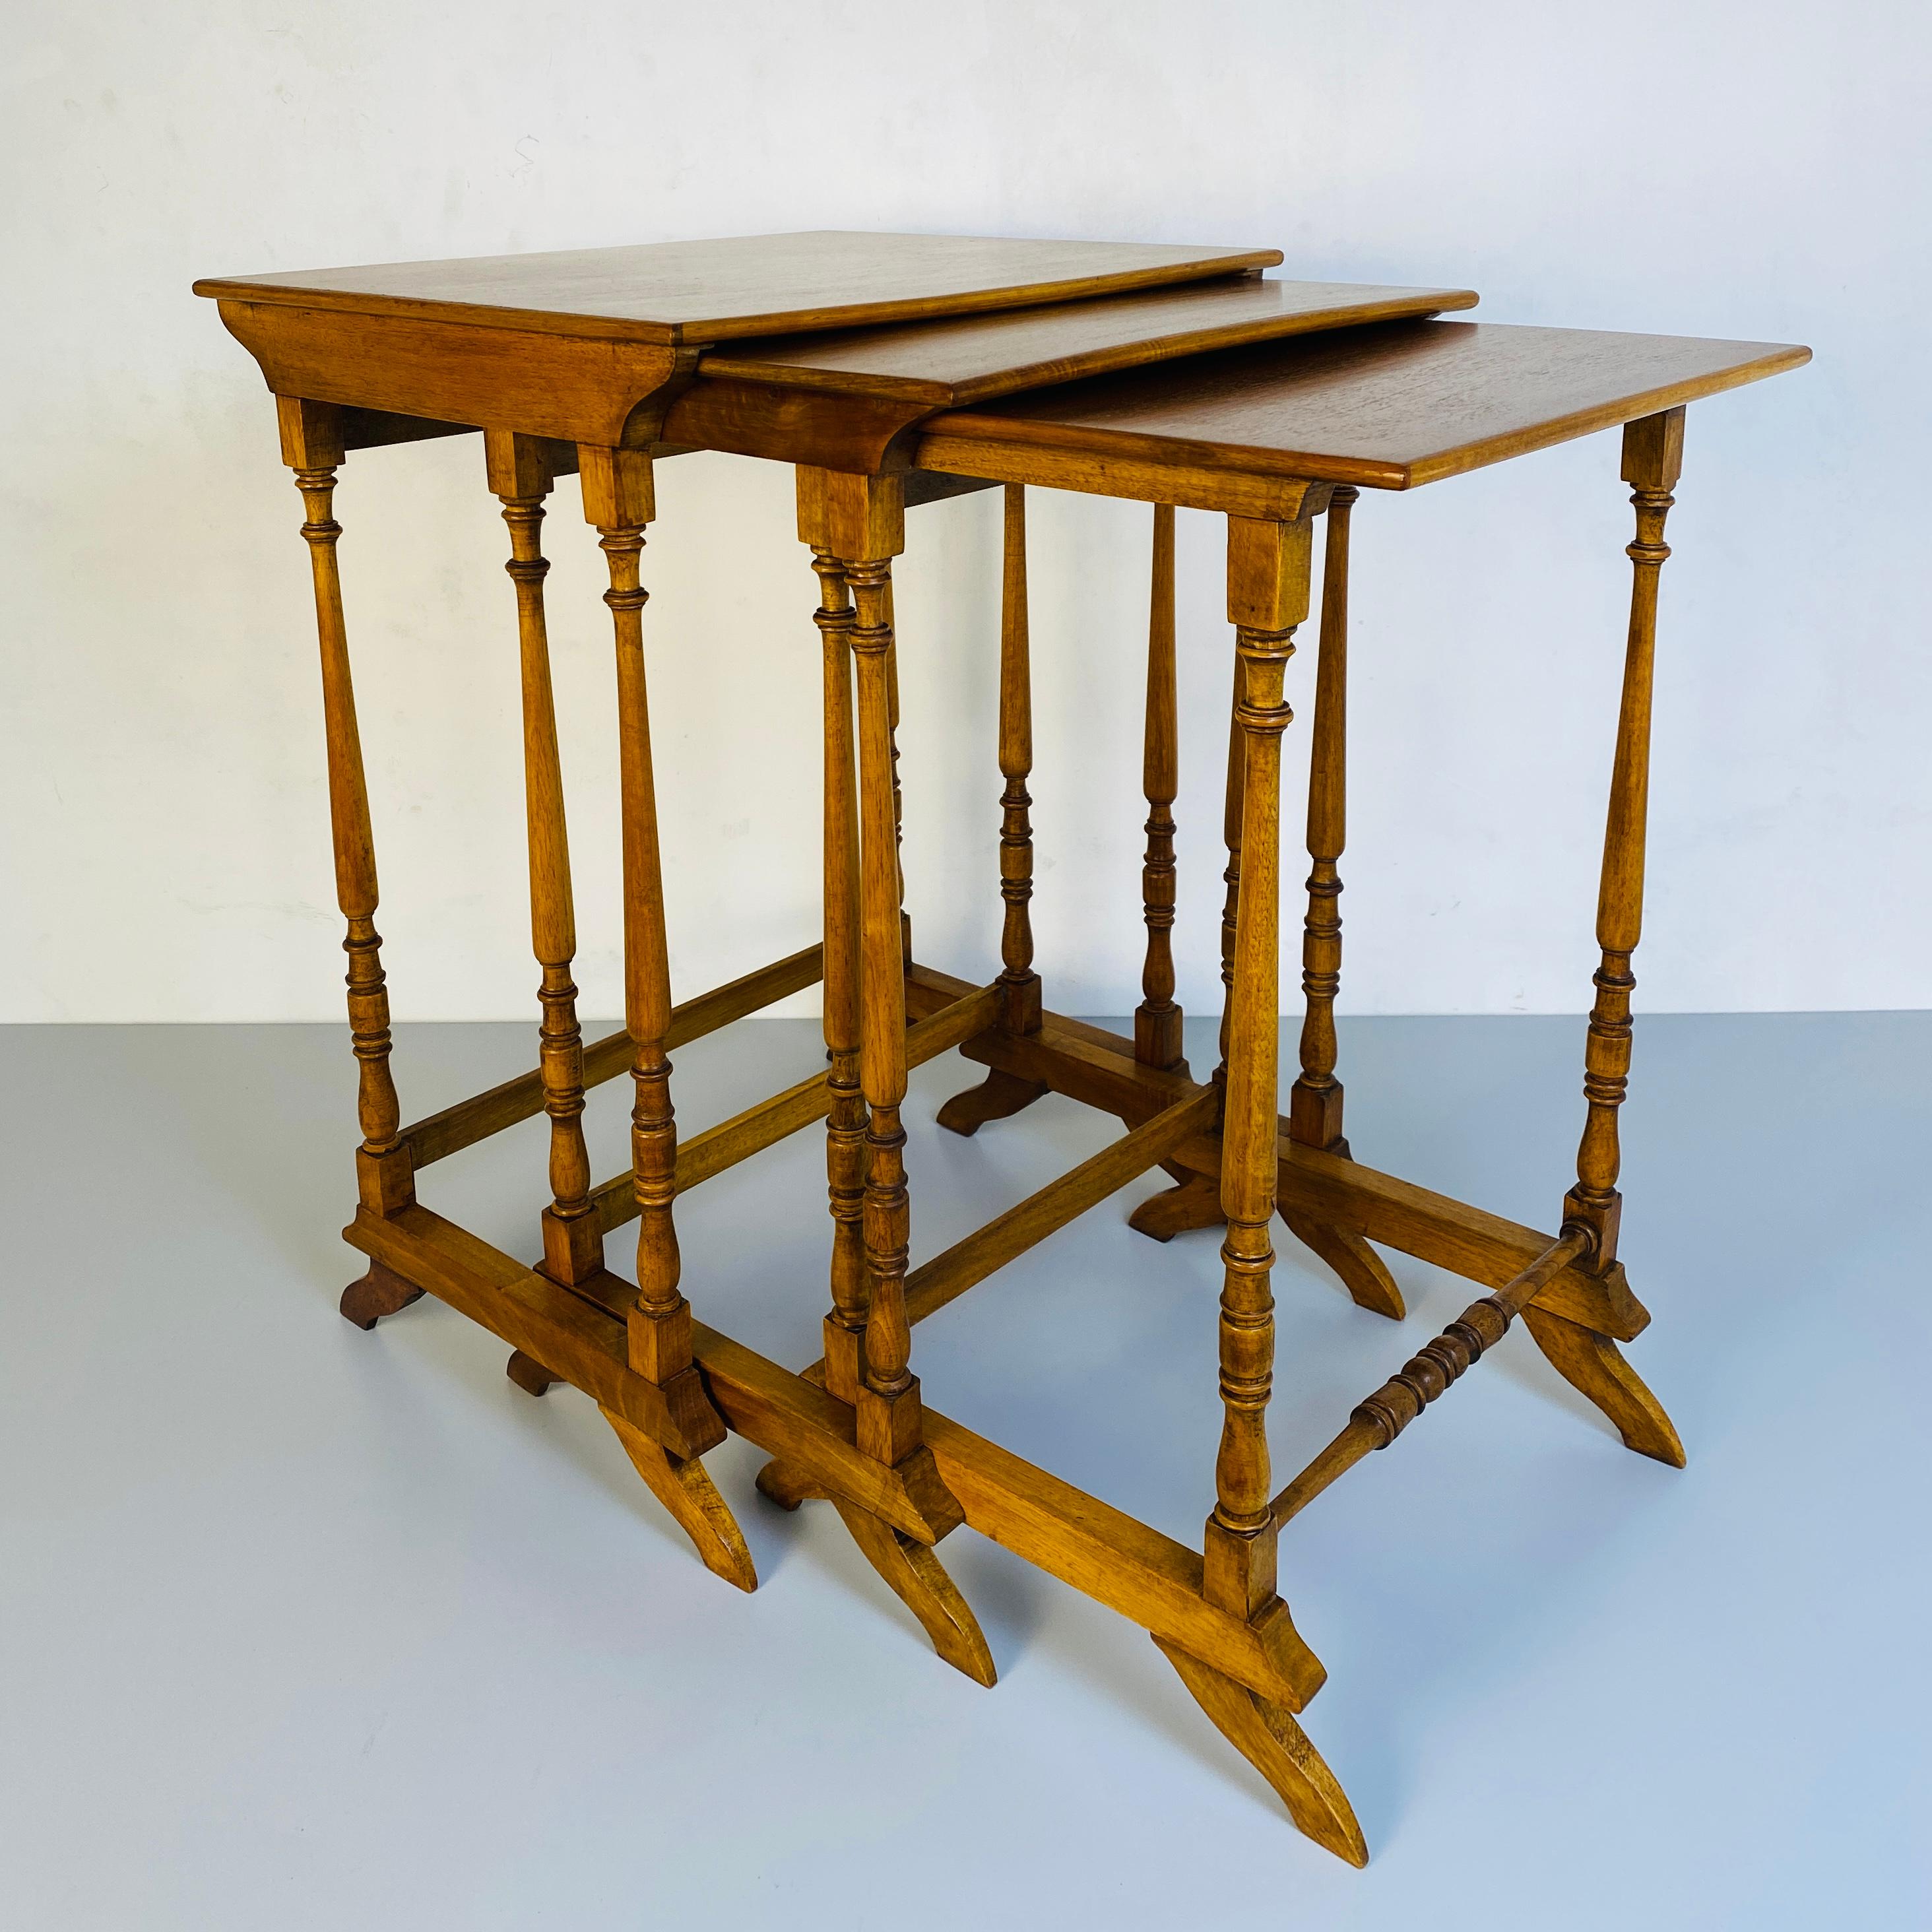 Early 20th Century Italian Set of Three Rectangular Light Wood Tables with Shapely Legs, 1900s